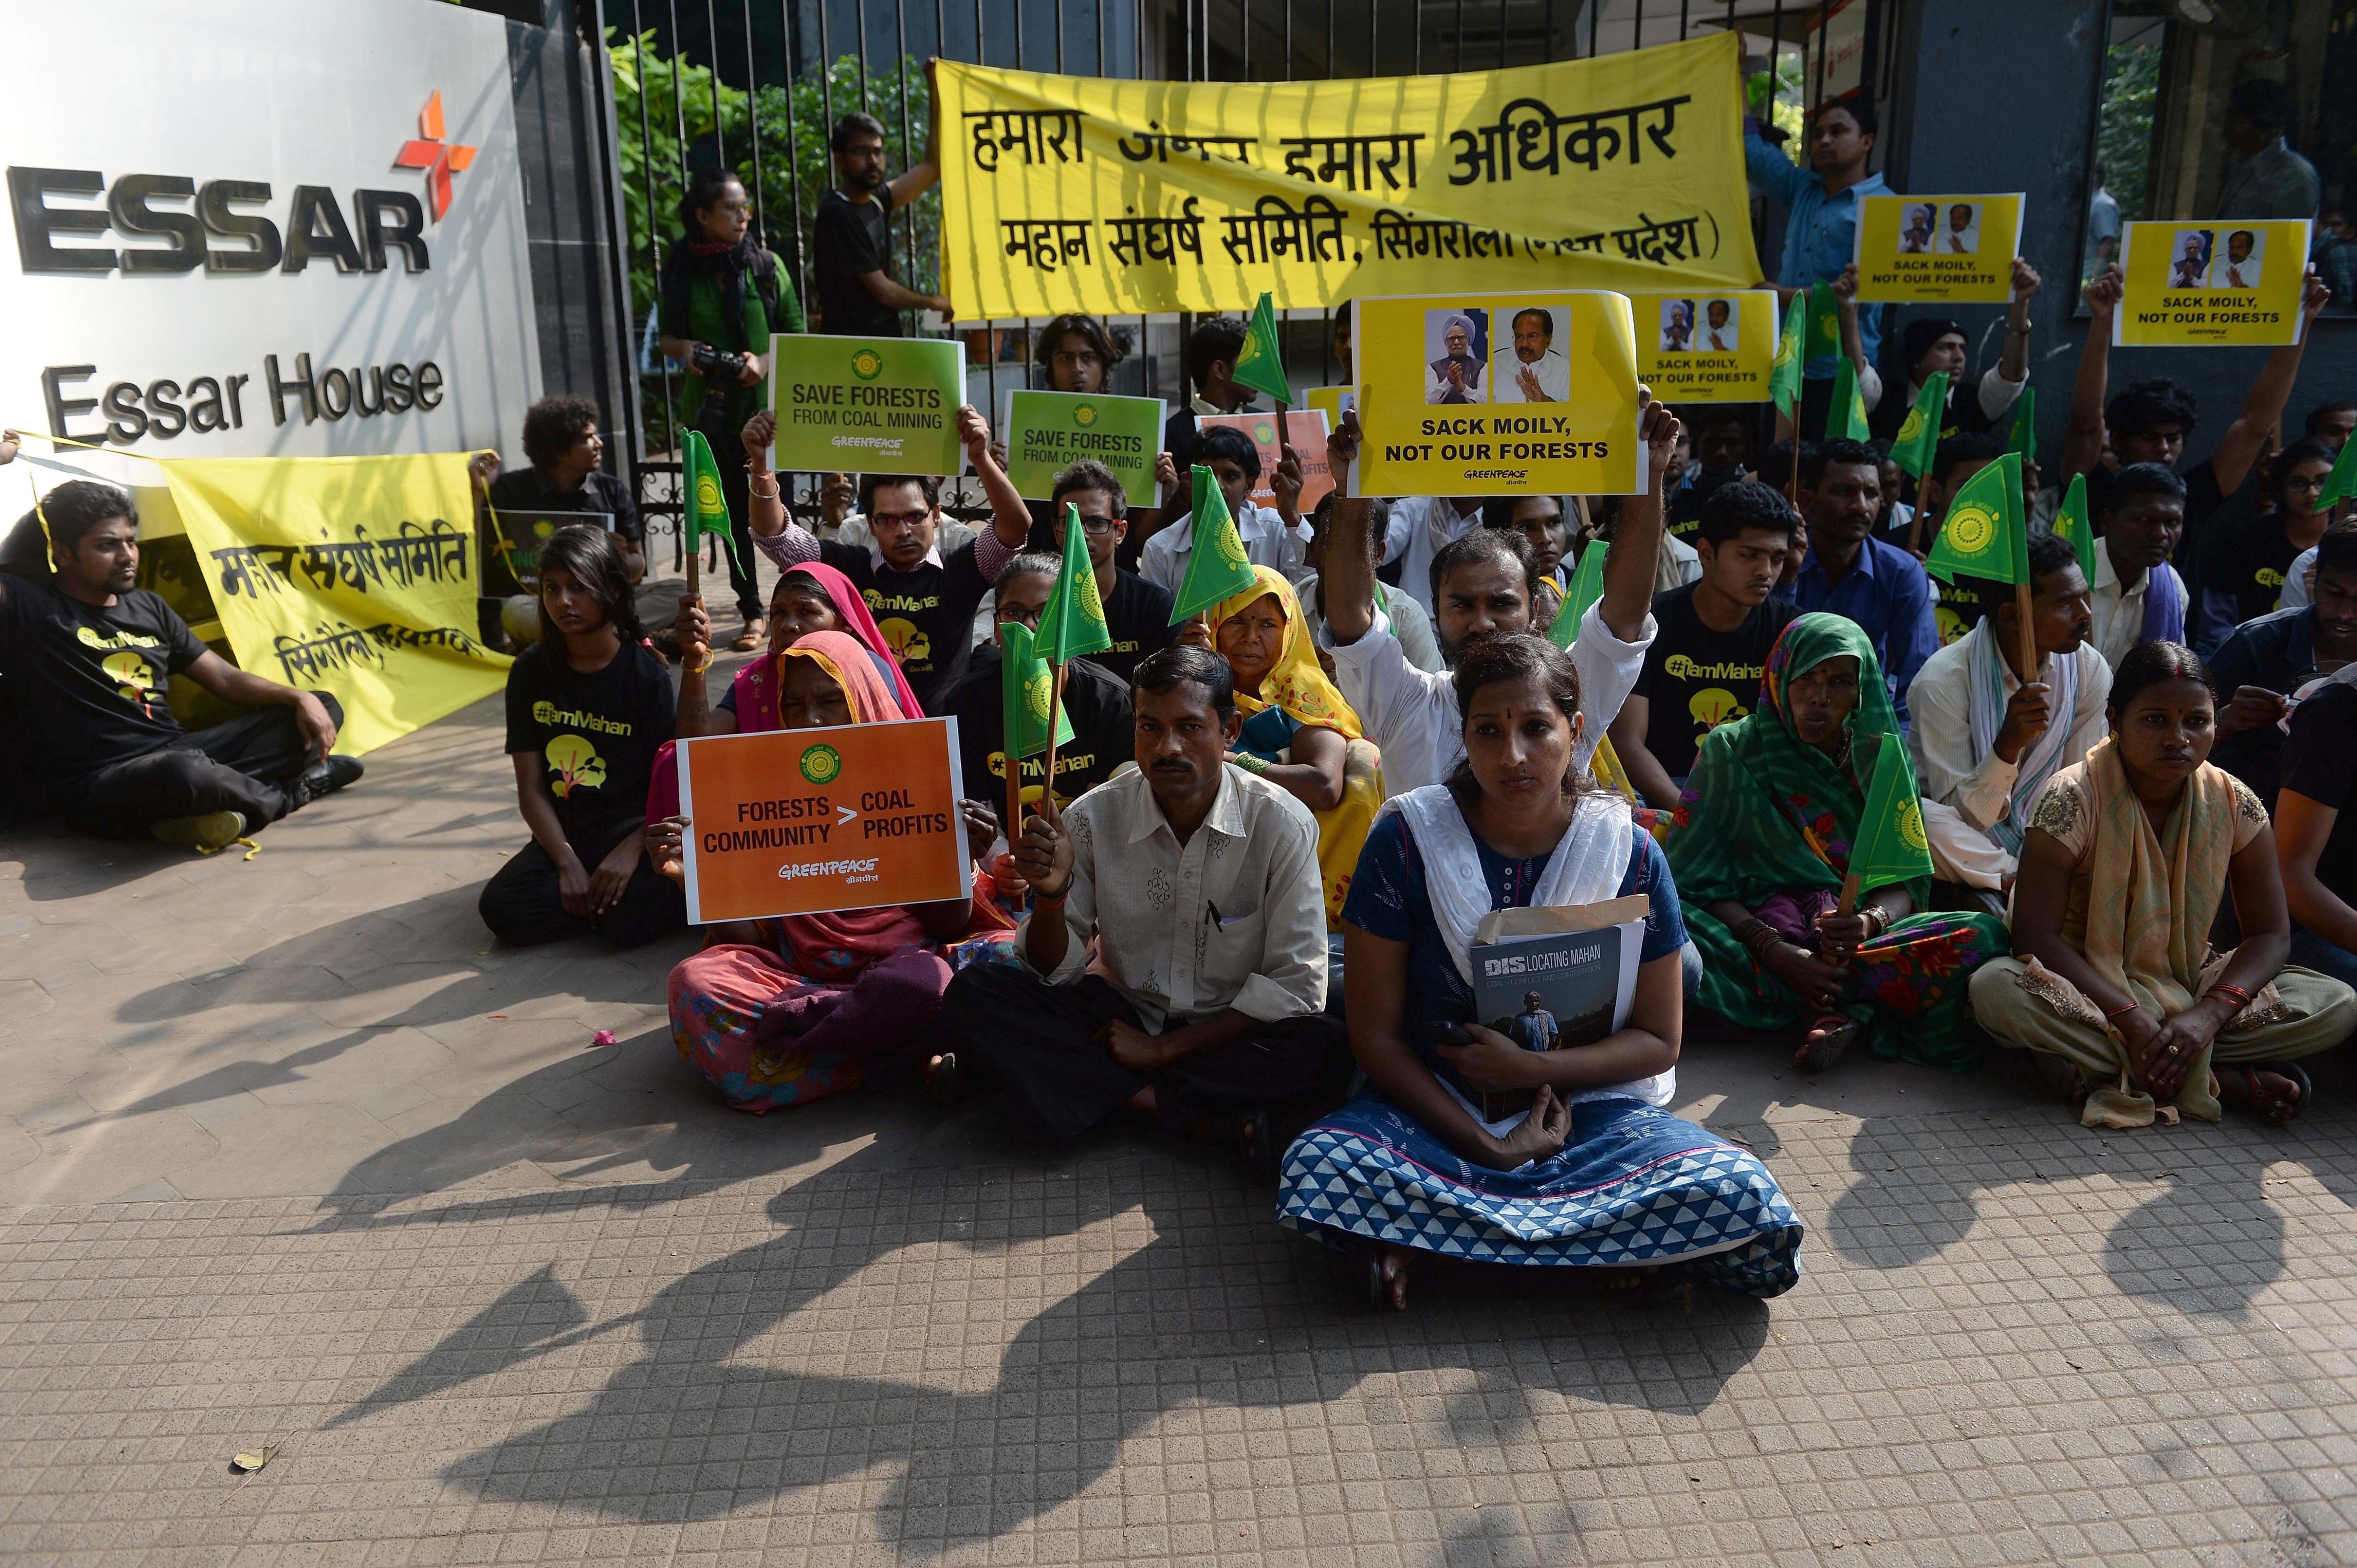 Activists from the environmental group Greenpeace and local farmers from Madhya Pradesh state sit outside the headquarters of India's Essar Group during a protest in Mumbai on Jan. 22, 2014 (Punit Paranjpe—AFP/Getty Images)